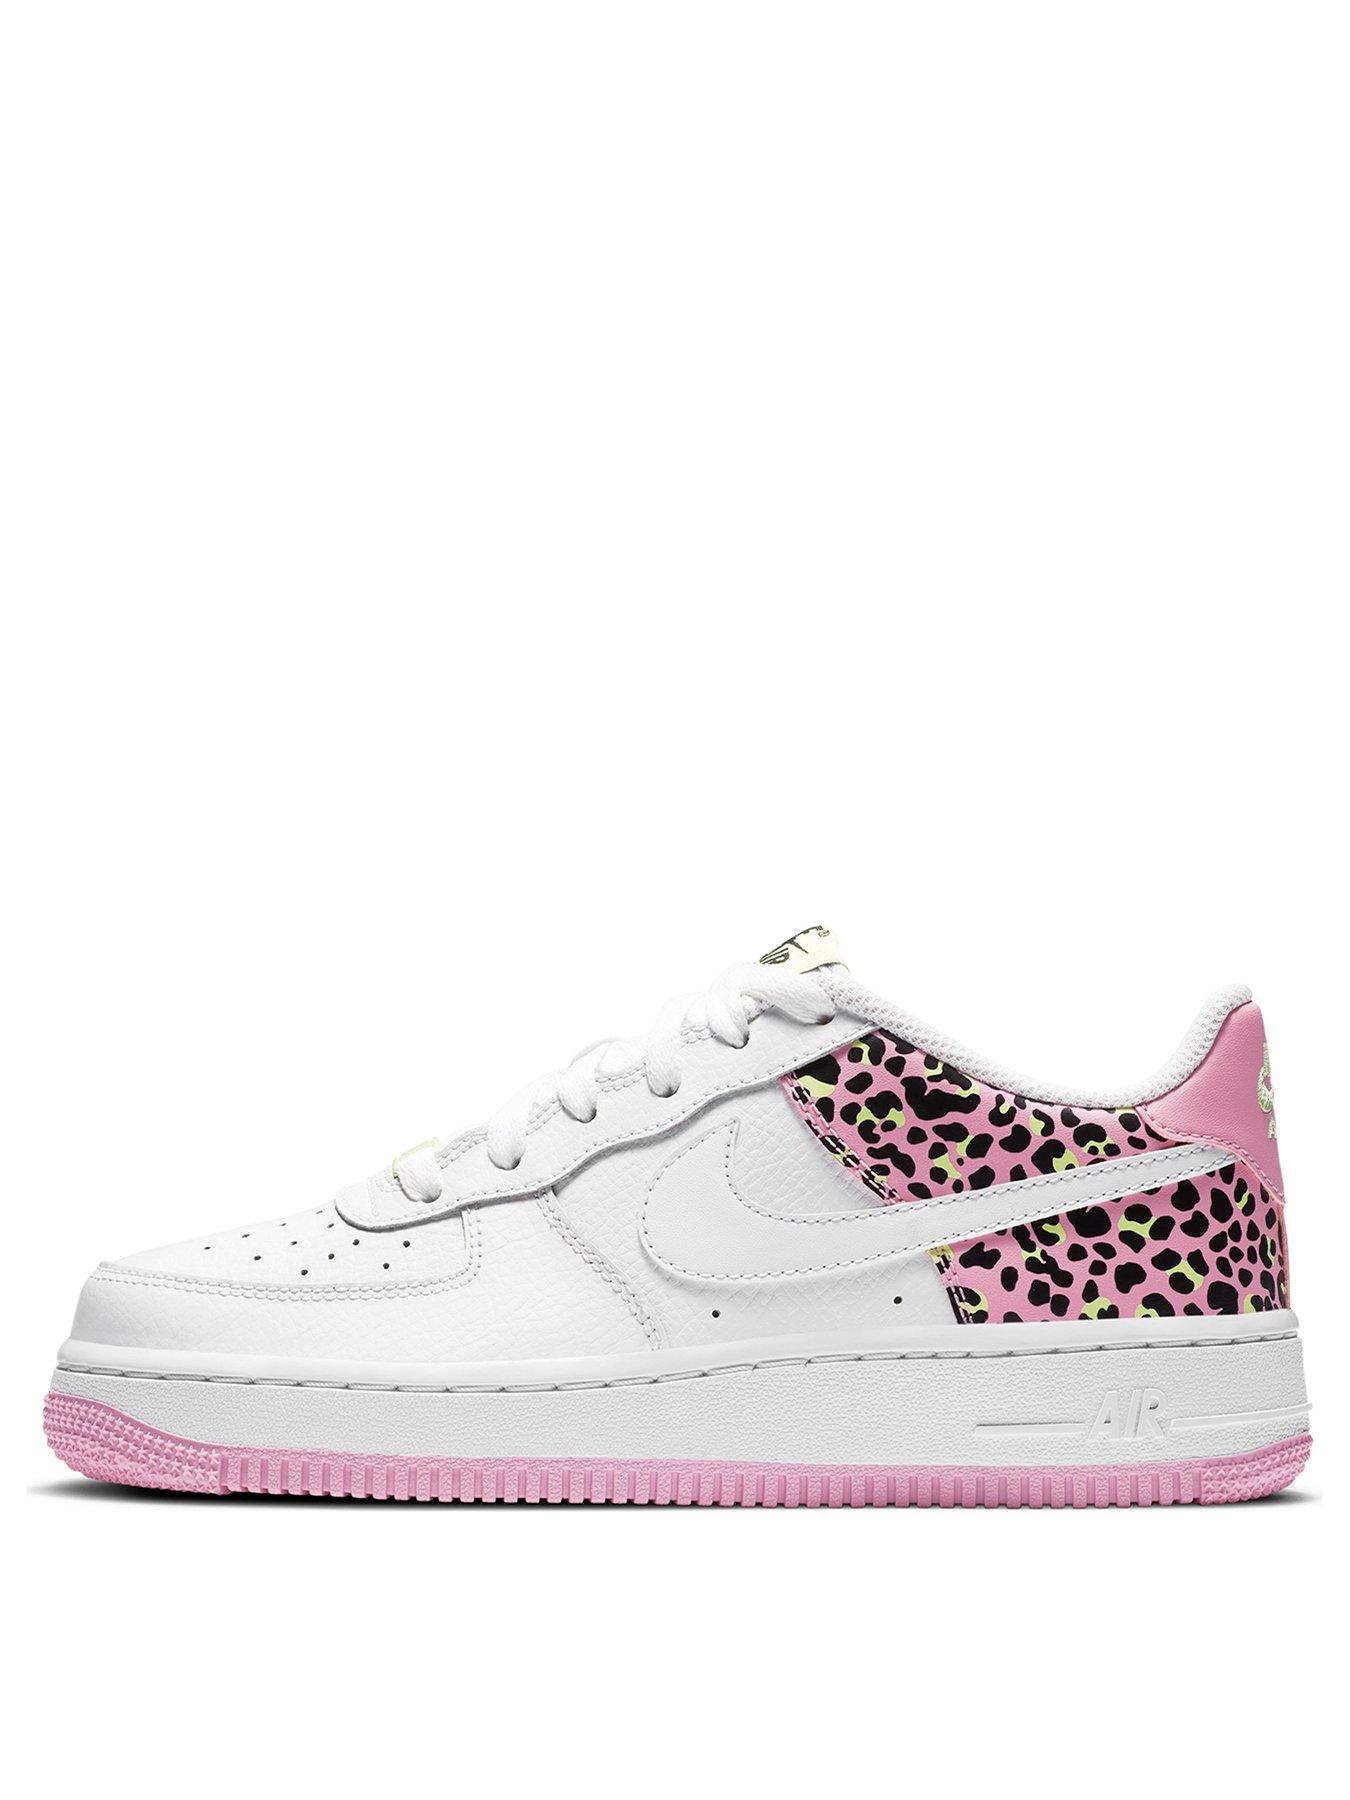 air force 1 junior size 5.5